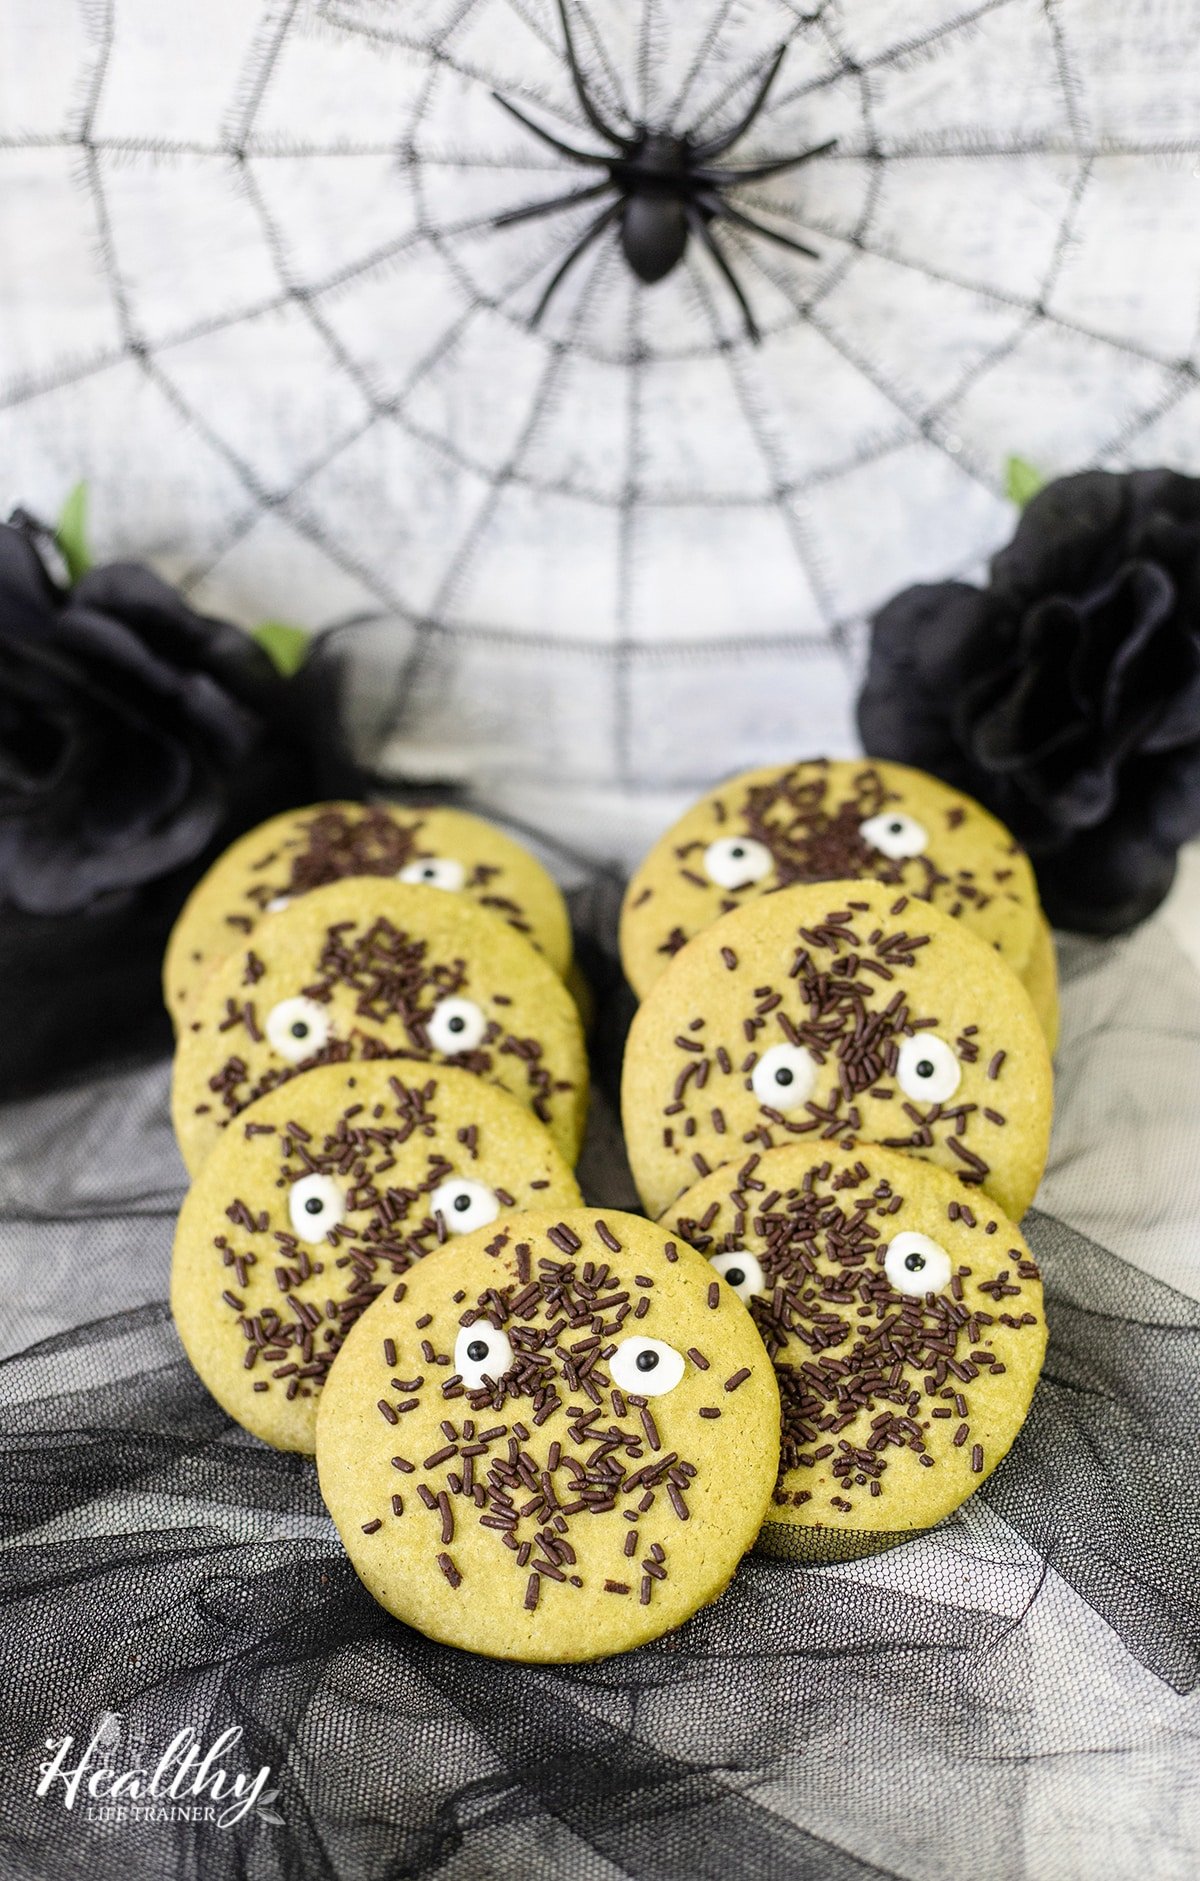 Matcha spooky Halloween cookies with chocolate sprinkles and candy eyes.